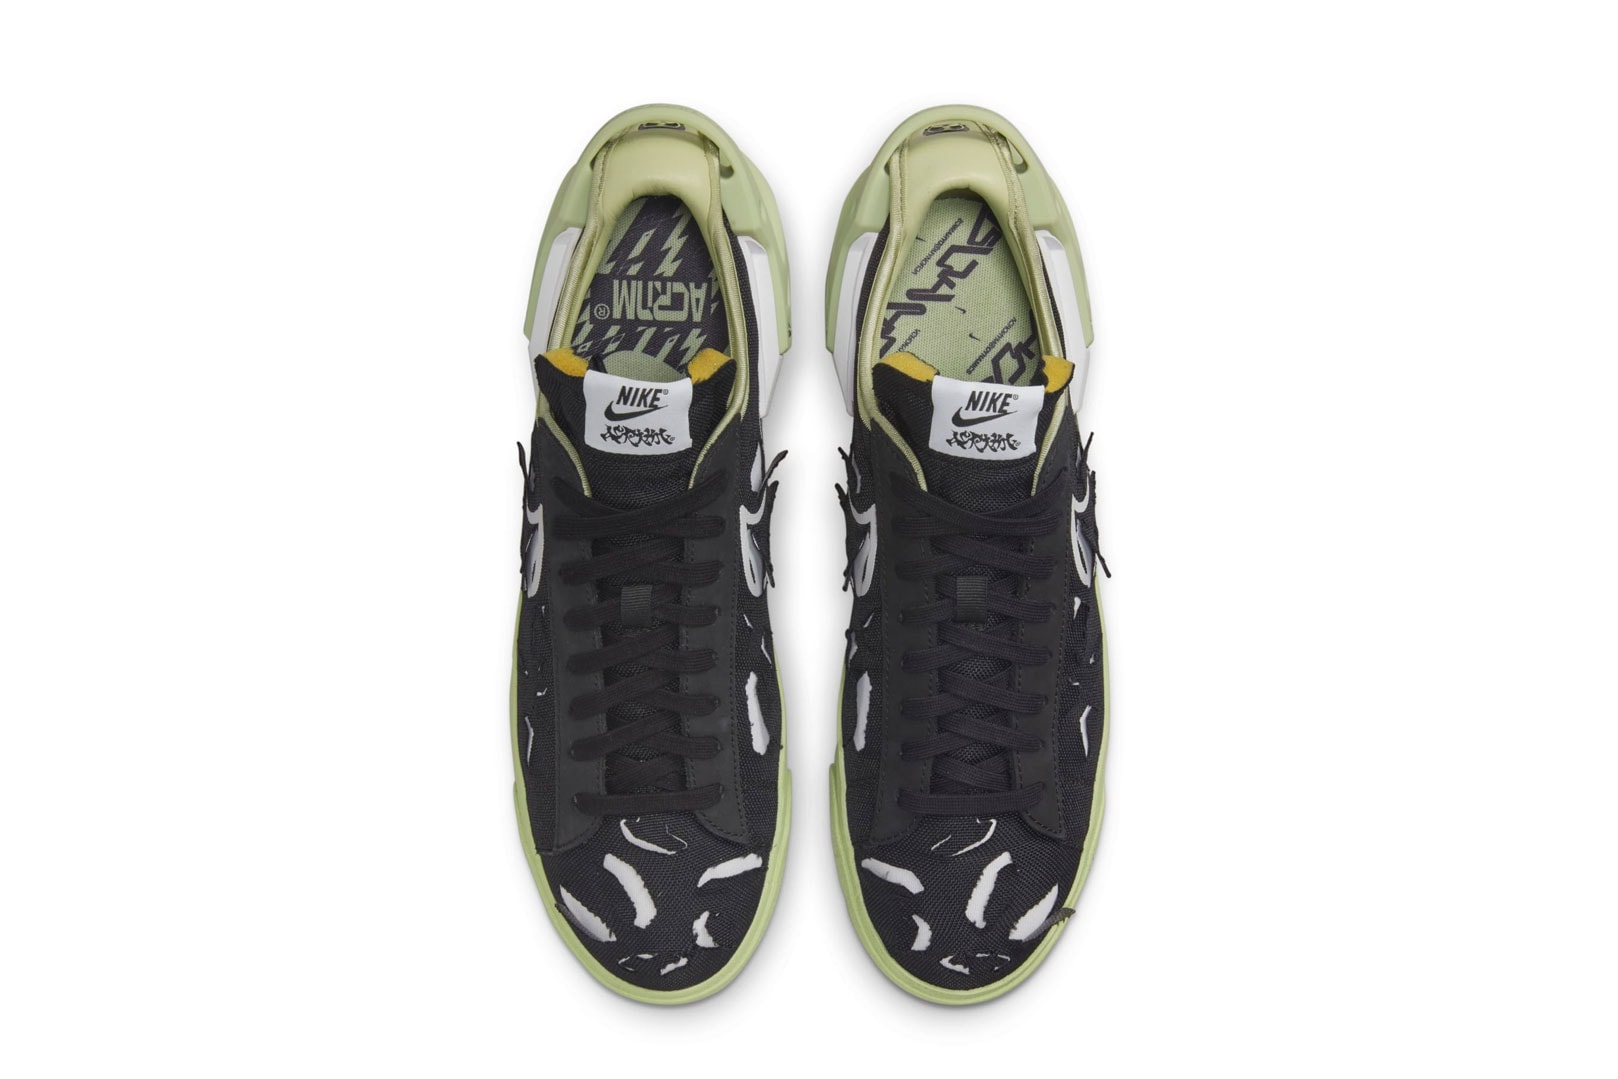 Official Look at the ACRONYM x Nike Blazer Low night maroon neon yellow lilac black glow in the dark green cutout foam calligraphy shuriken sneaker release date info price